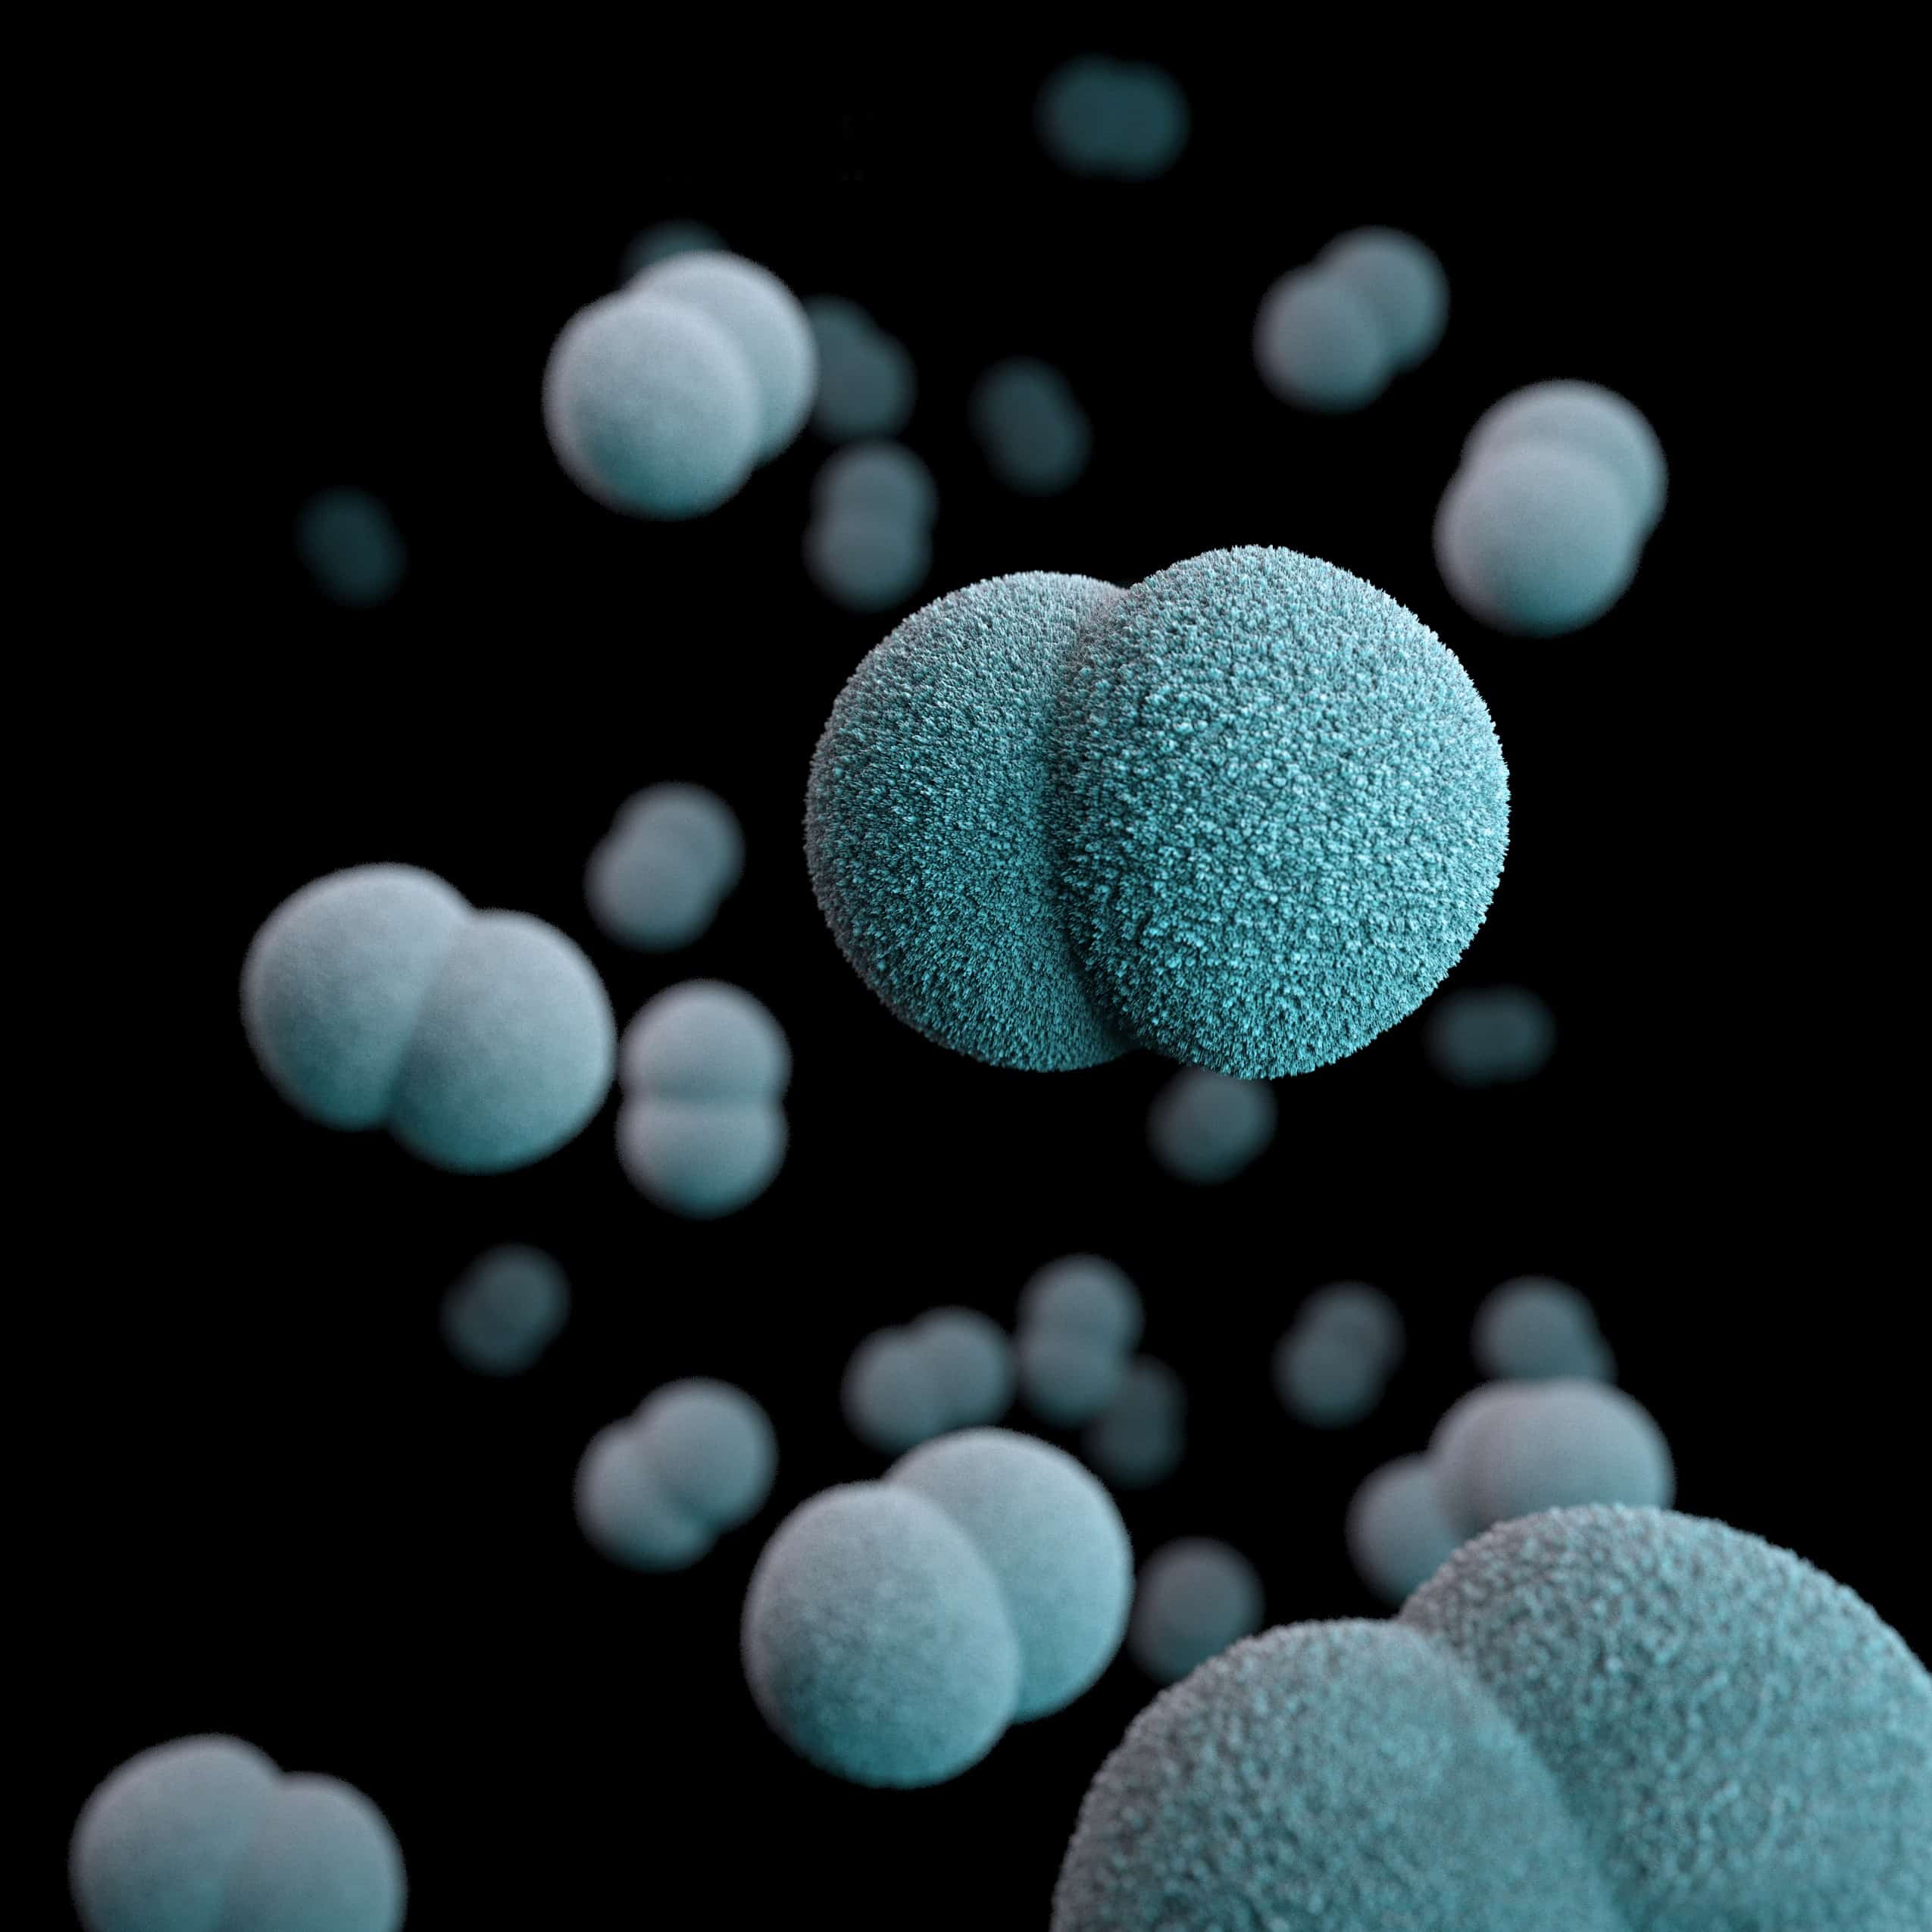 What to expect on Antimicrobial Resistance in 2020